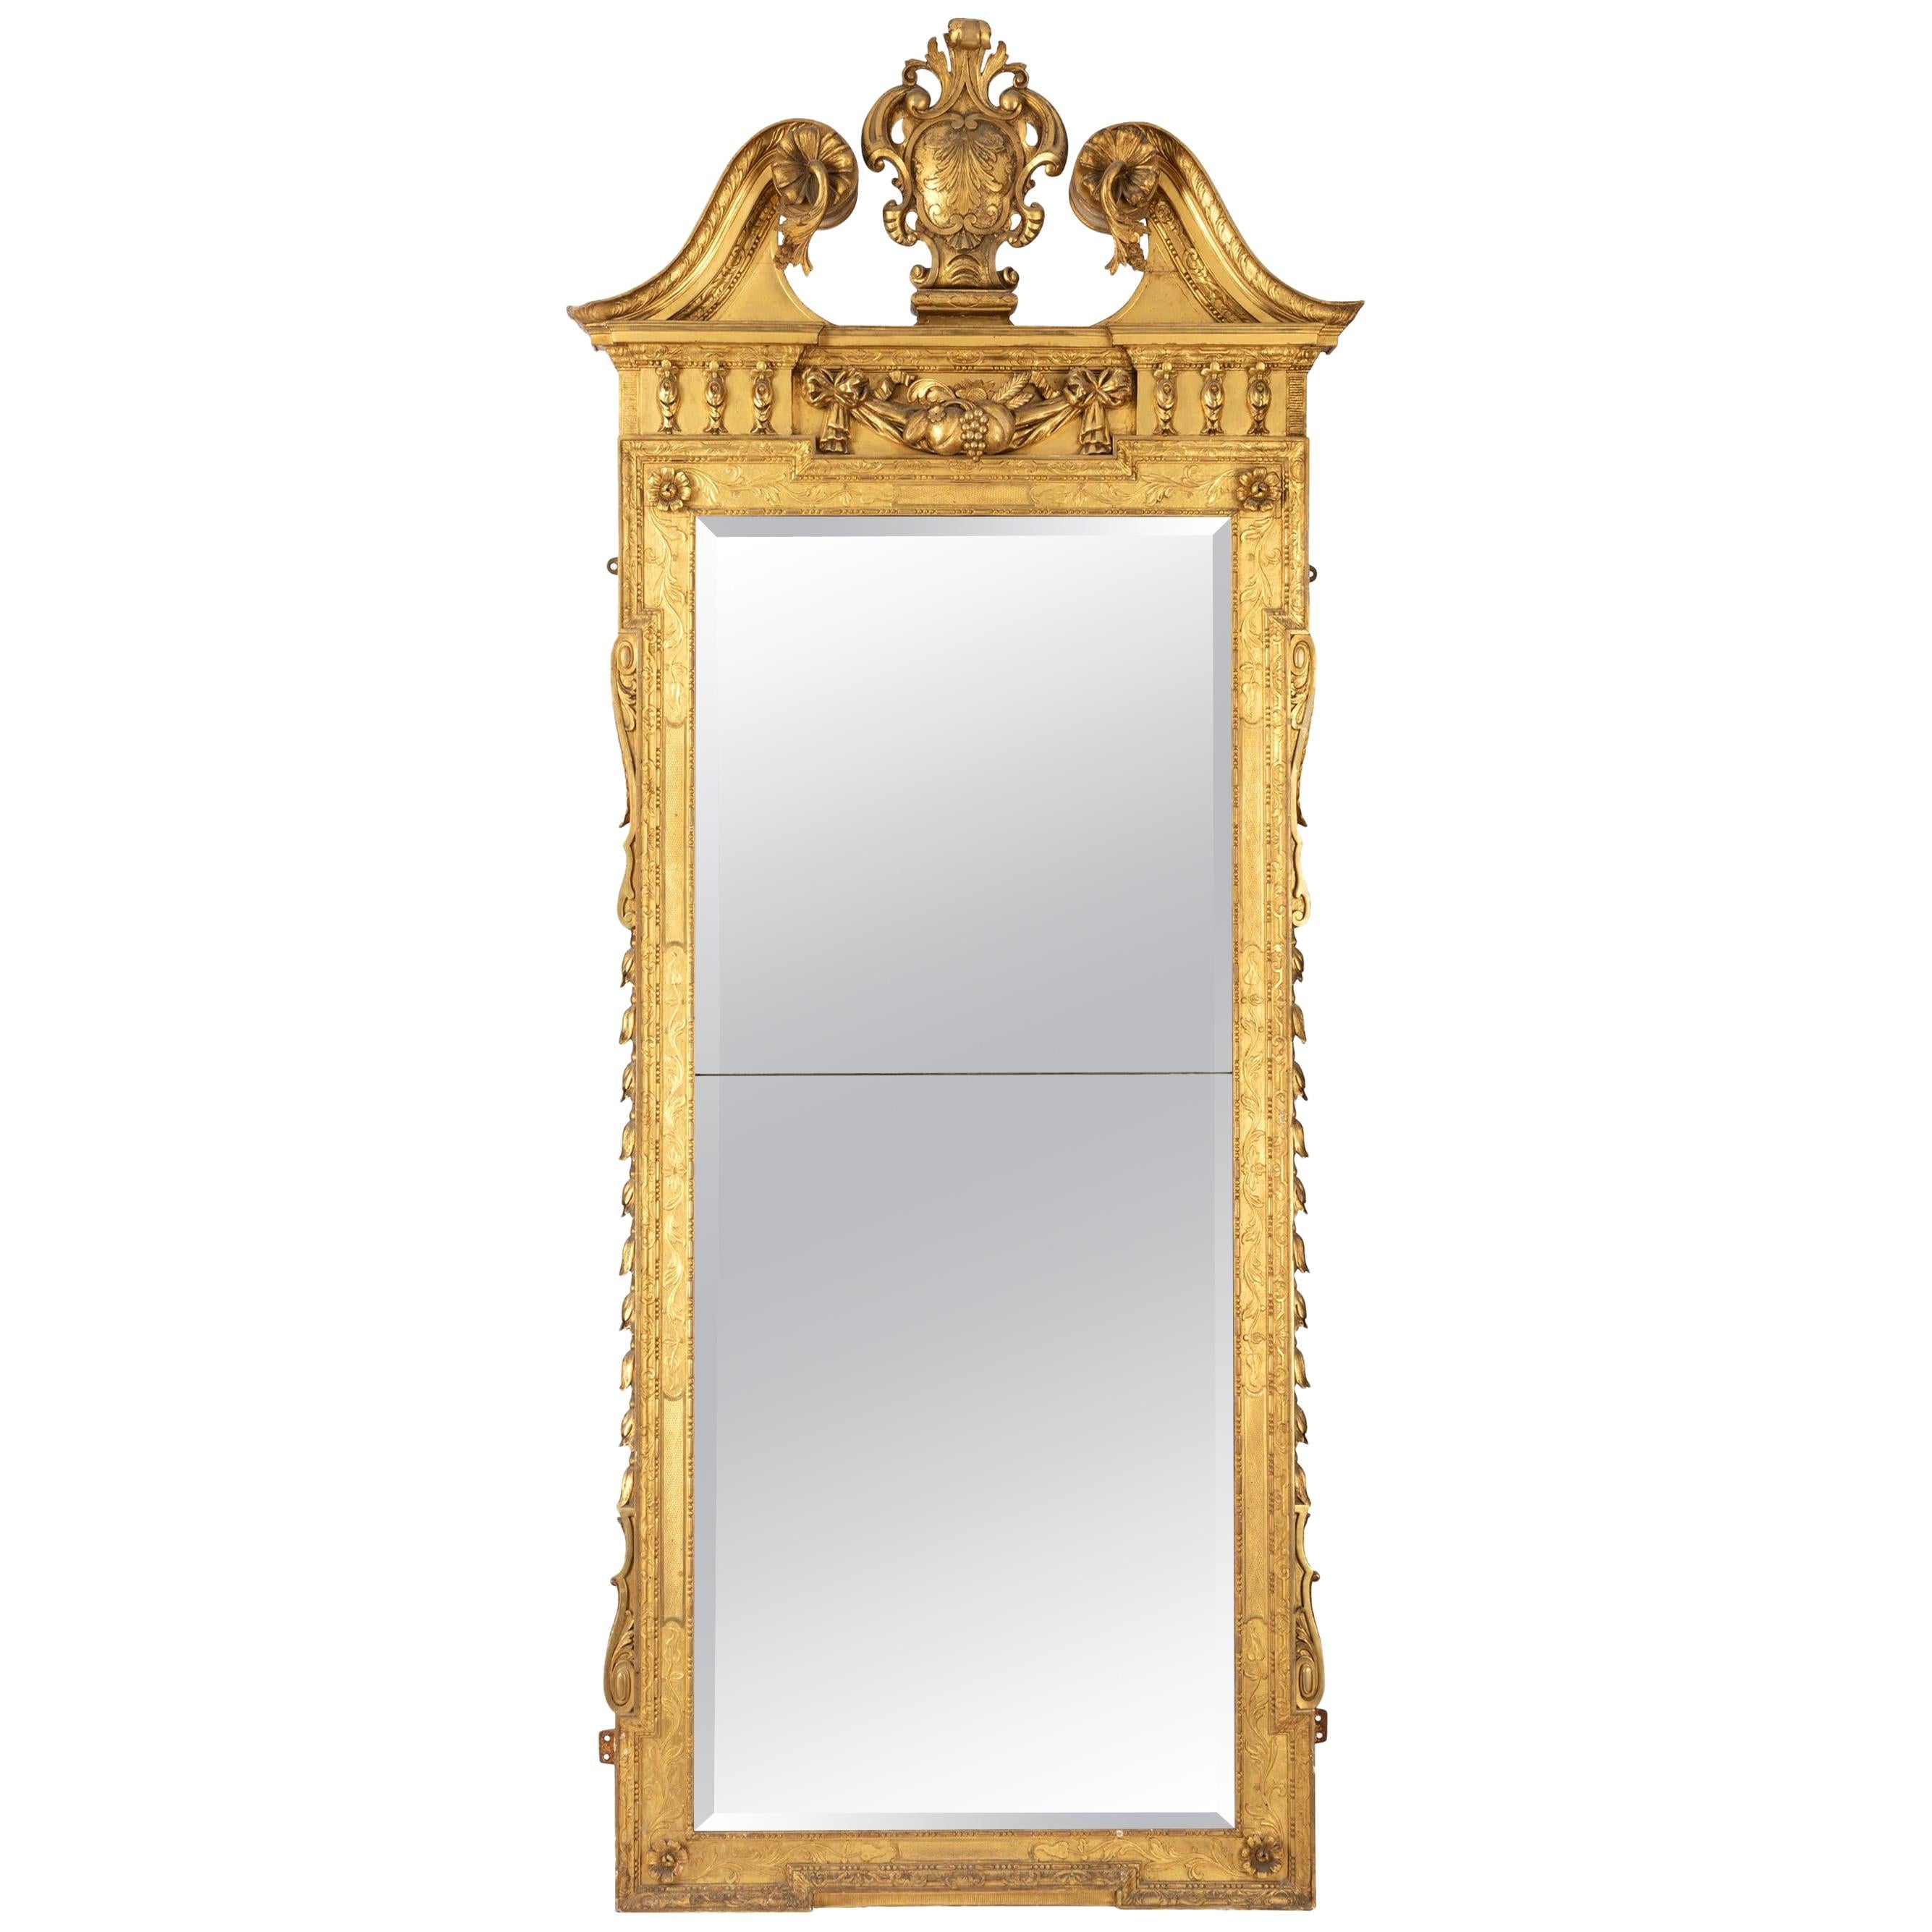 Victorian Giltwood Mirror after a Design by William Kent